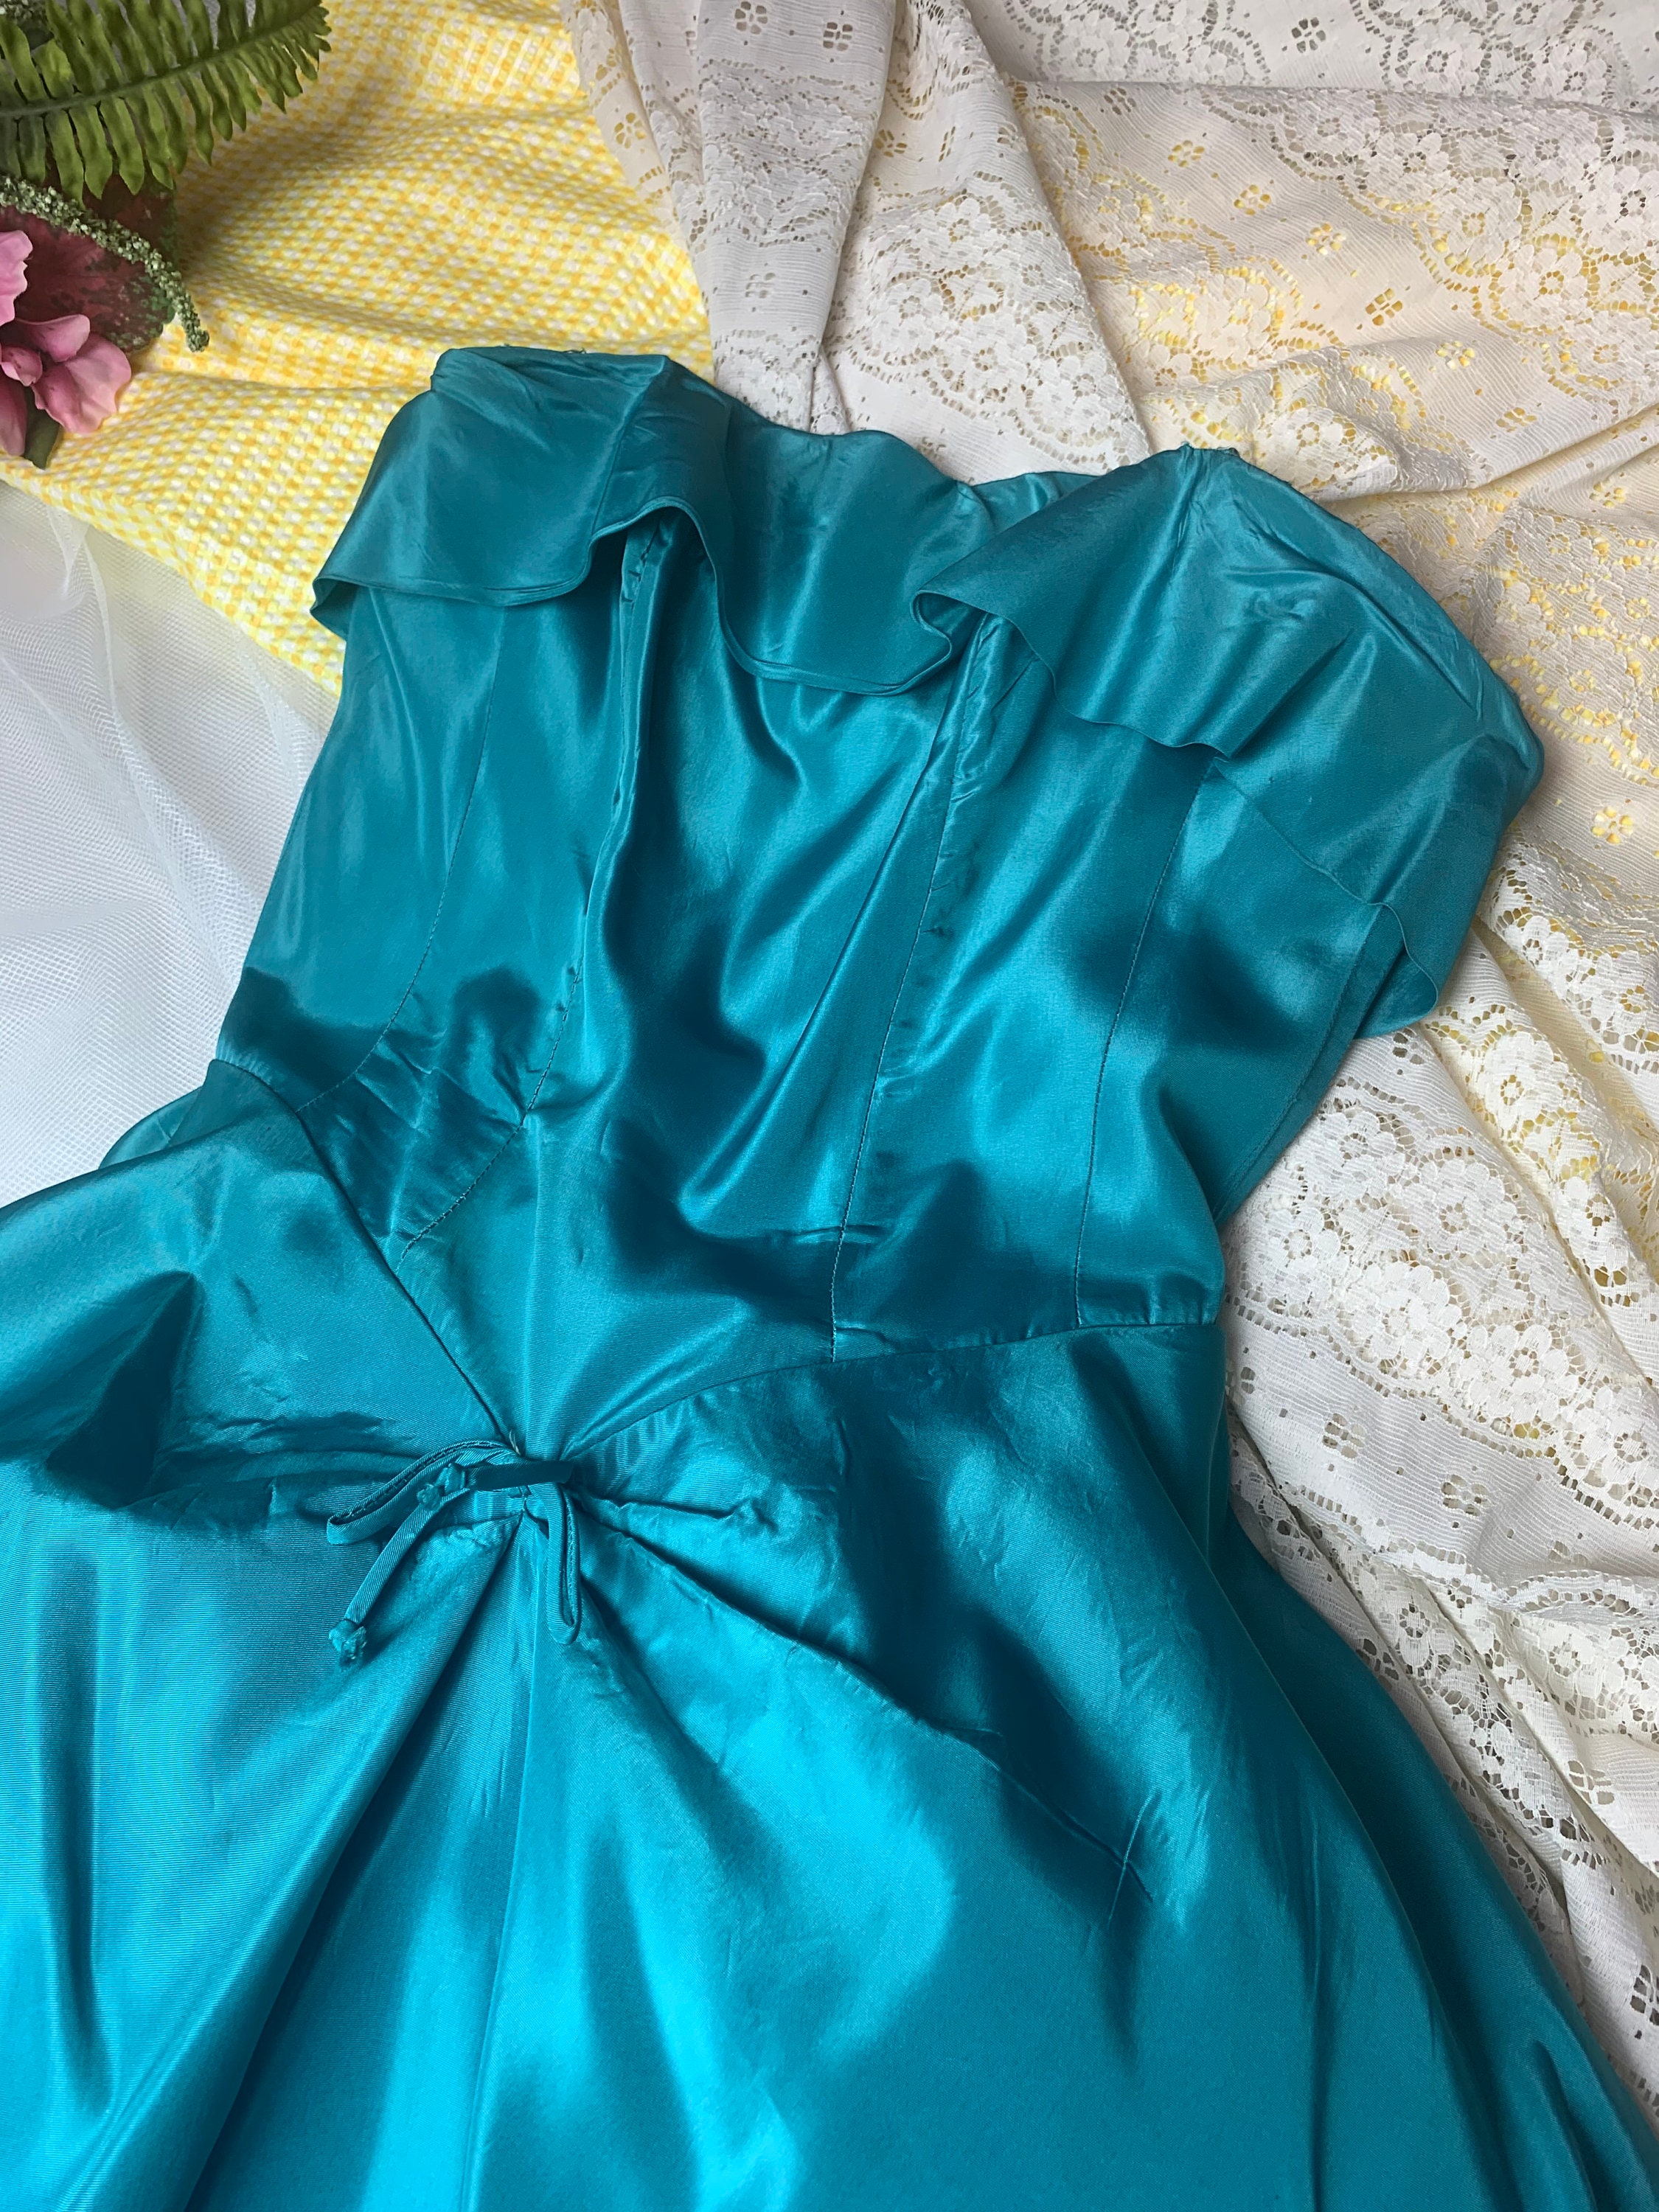 Vintage 1950s Teal Evening Gown with Removable Collar Prom | Etsy